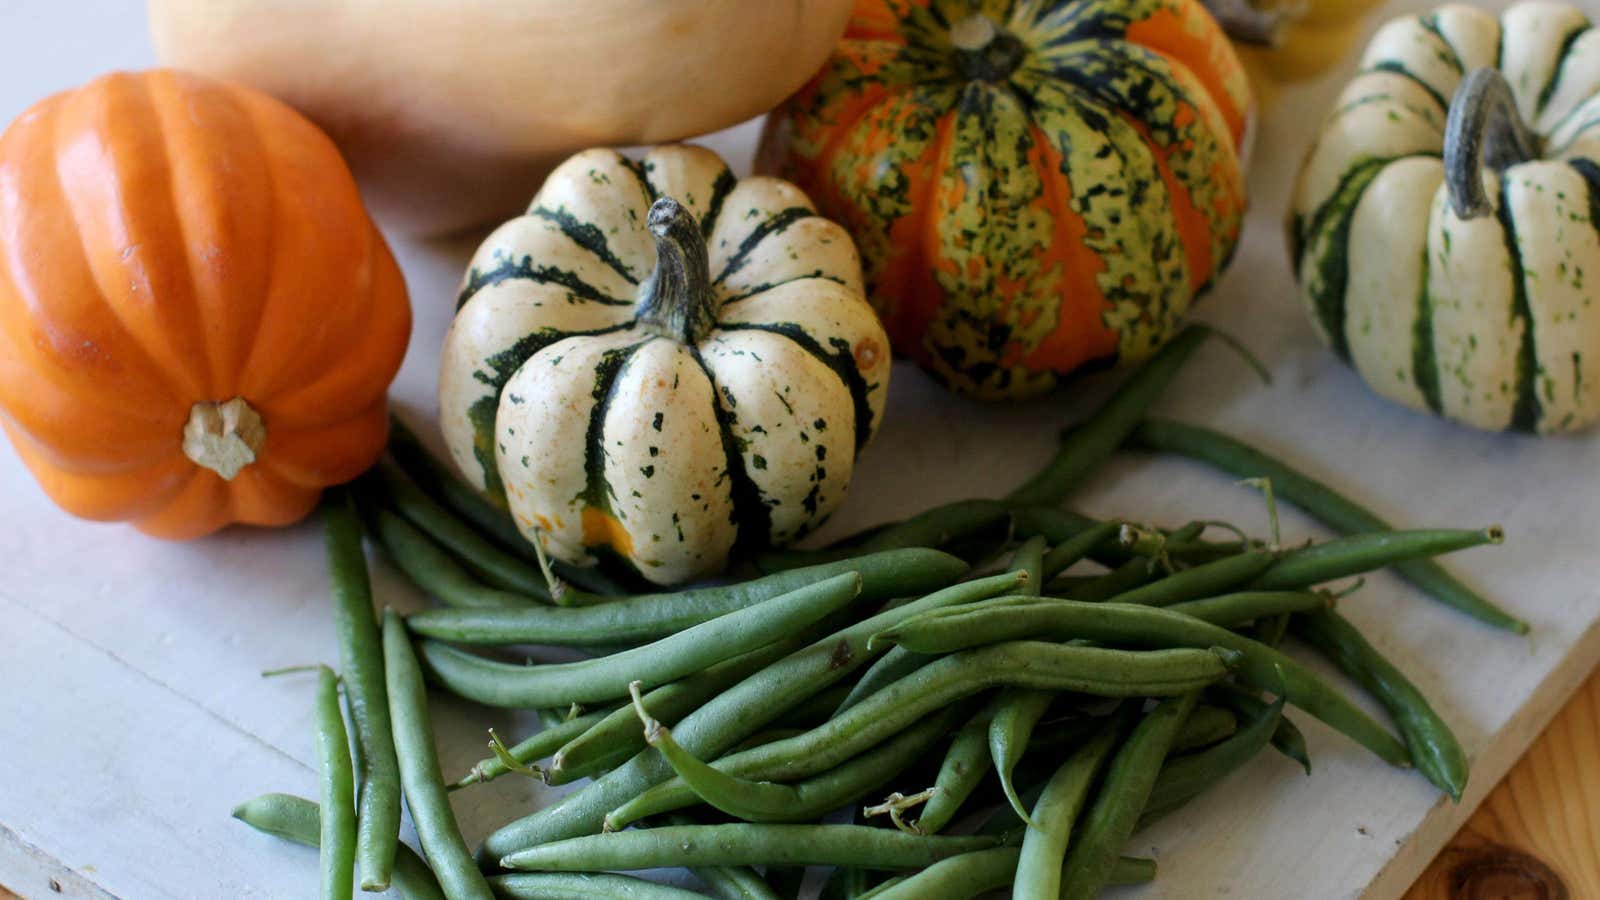 Ditch the decorative gourds.